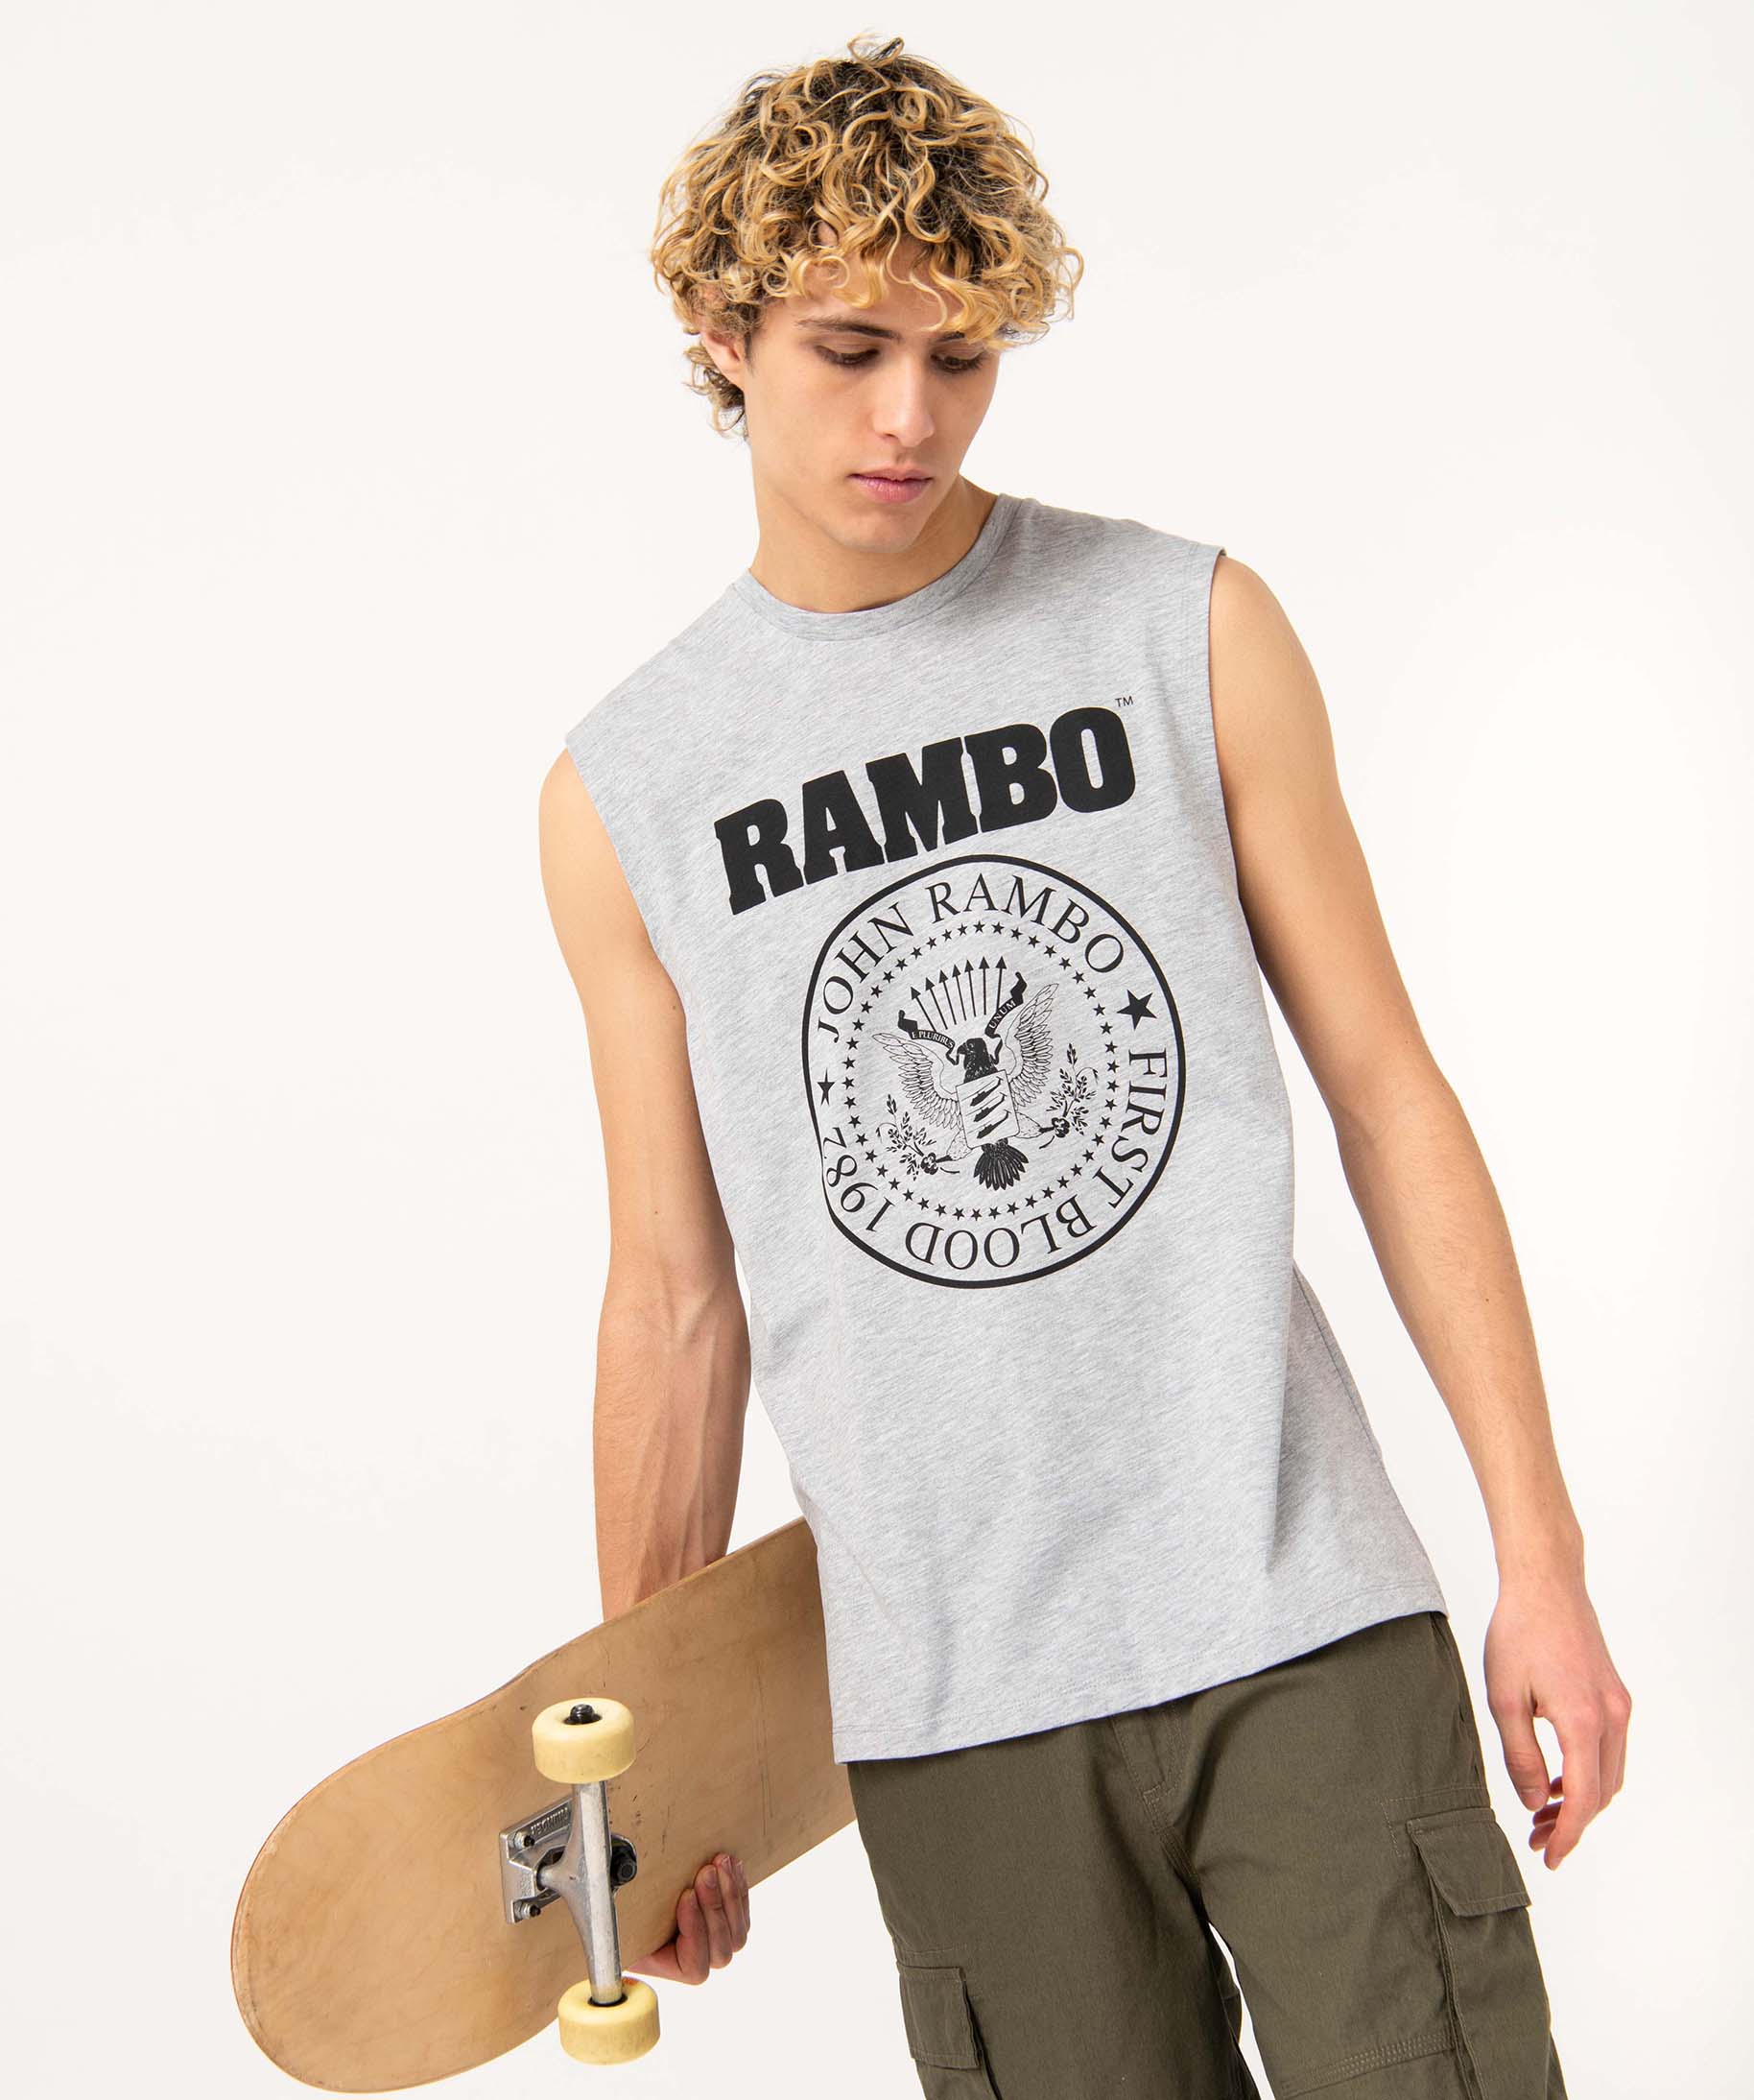 tee-shirt homme sans manches imprime - rambo gris tee-shirts